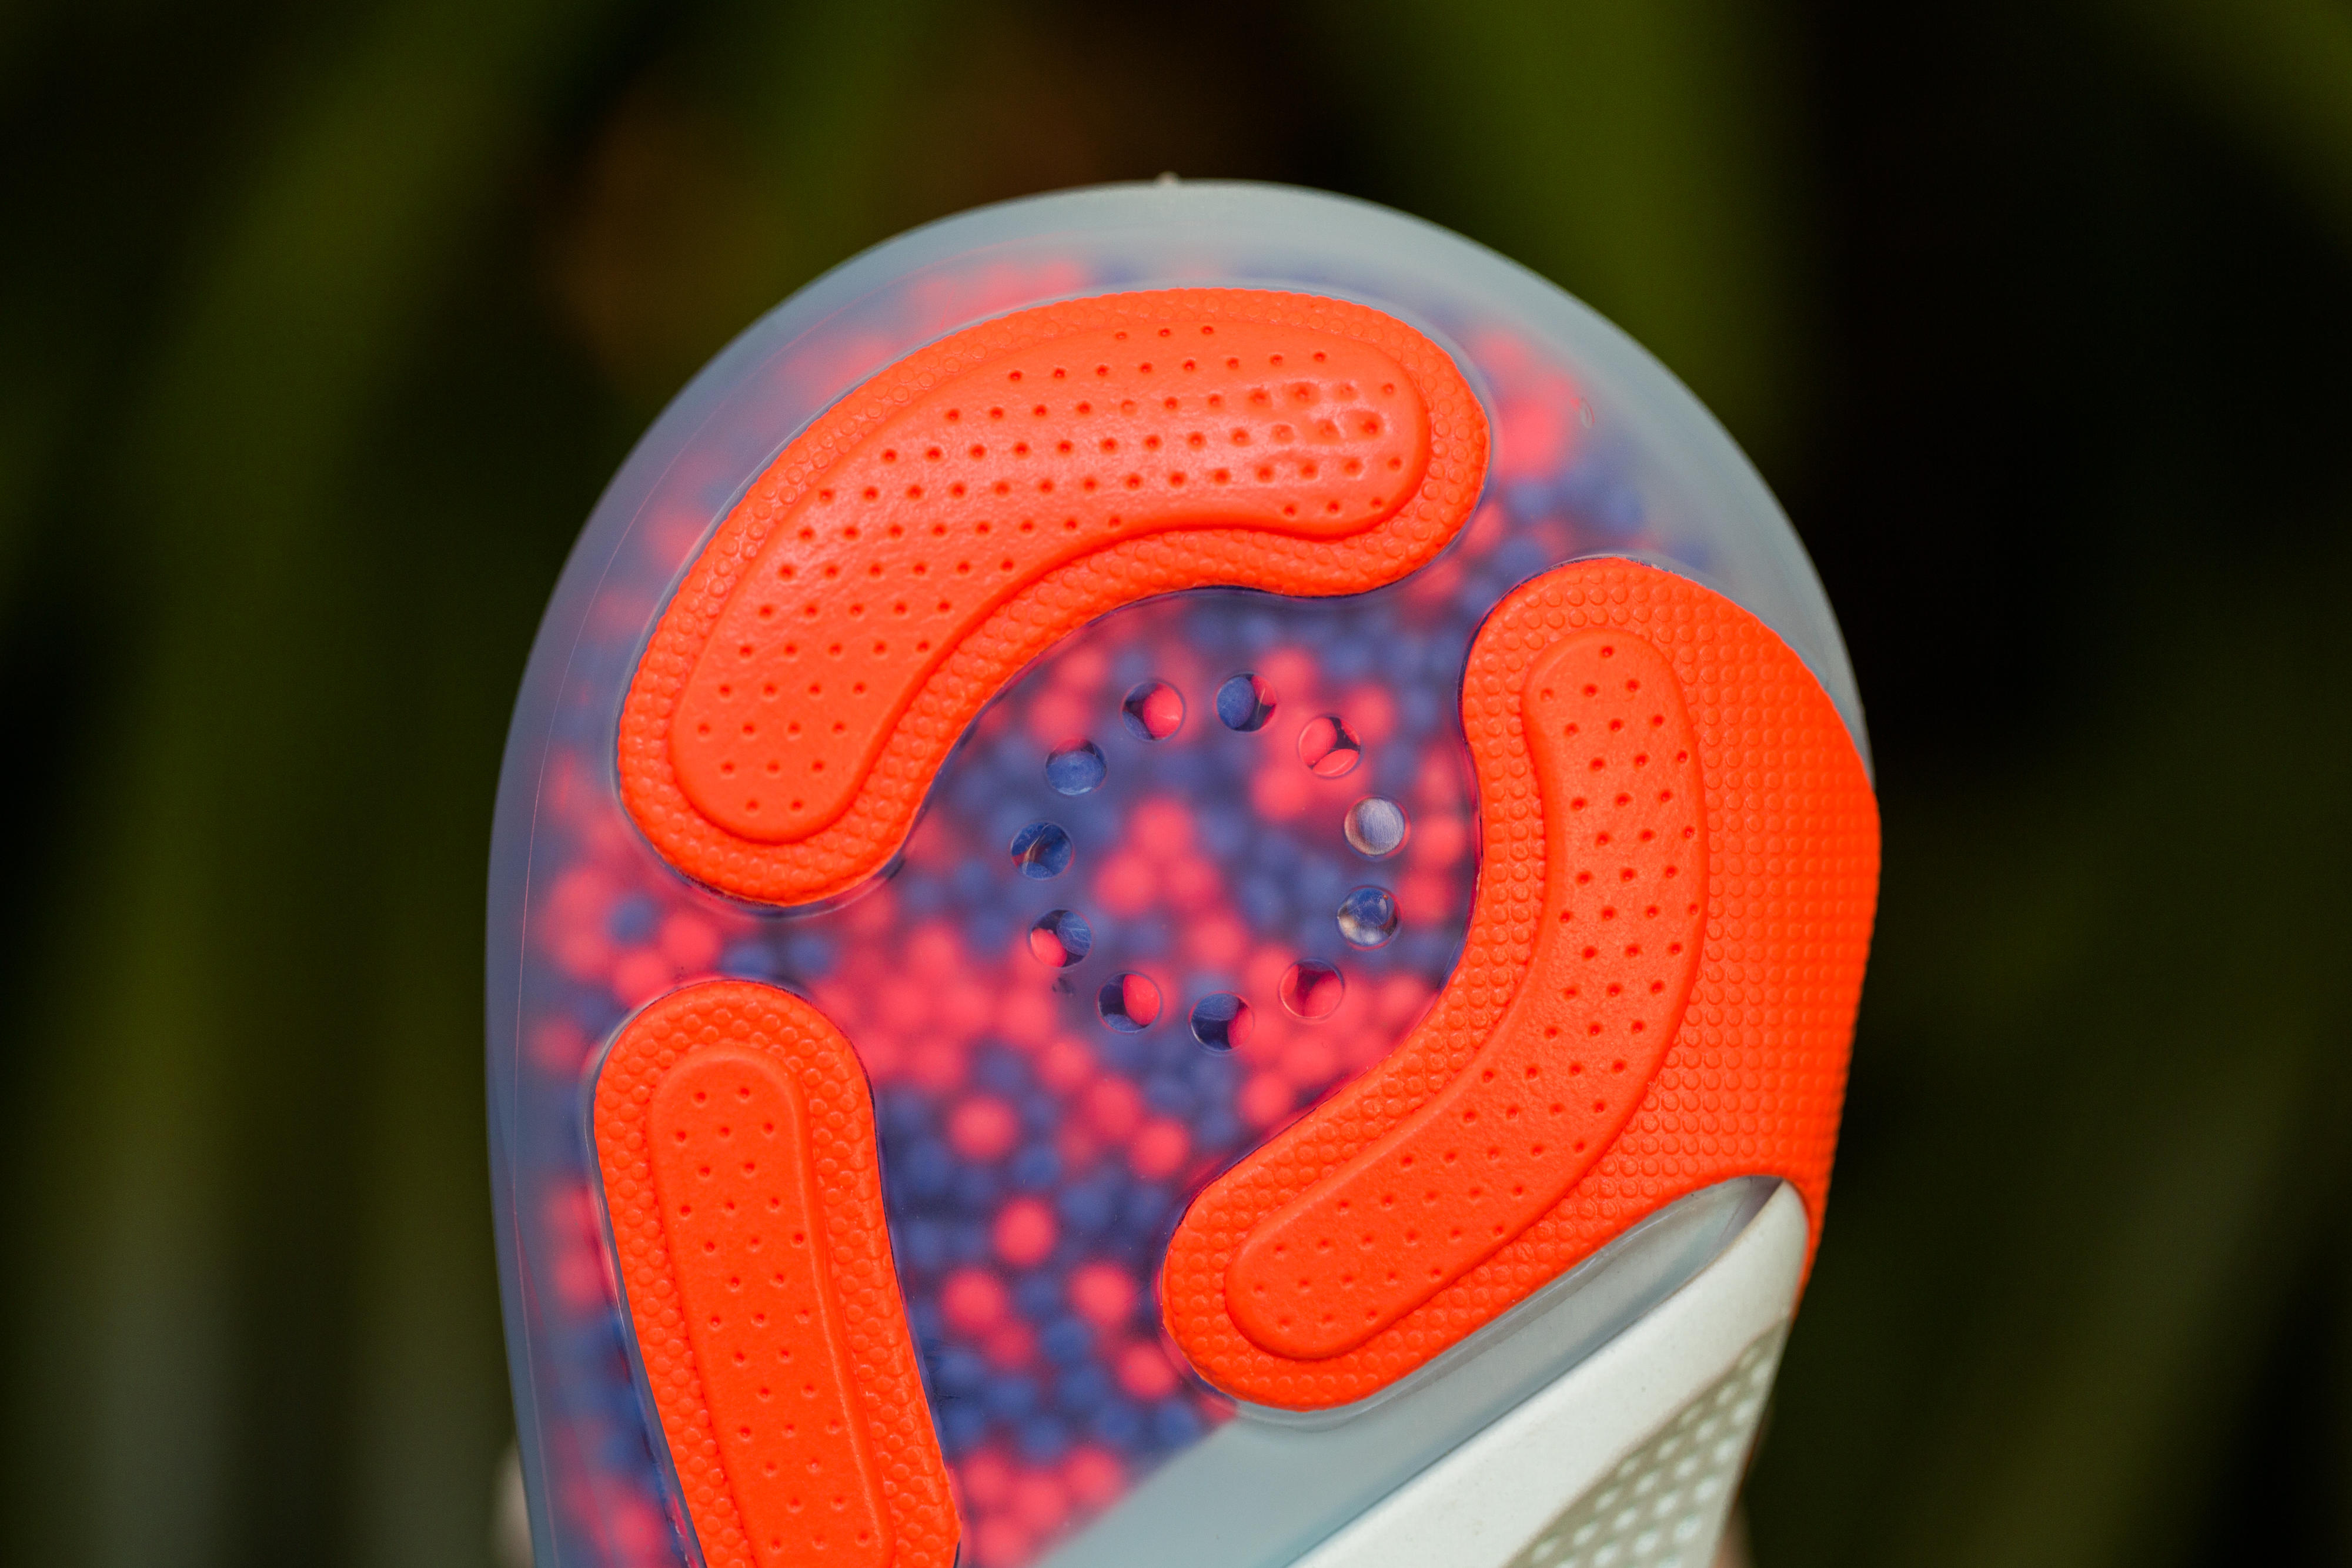 nike shoes with bumpy sole